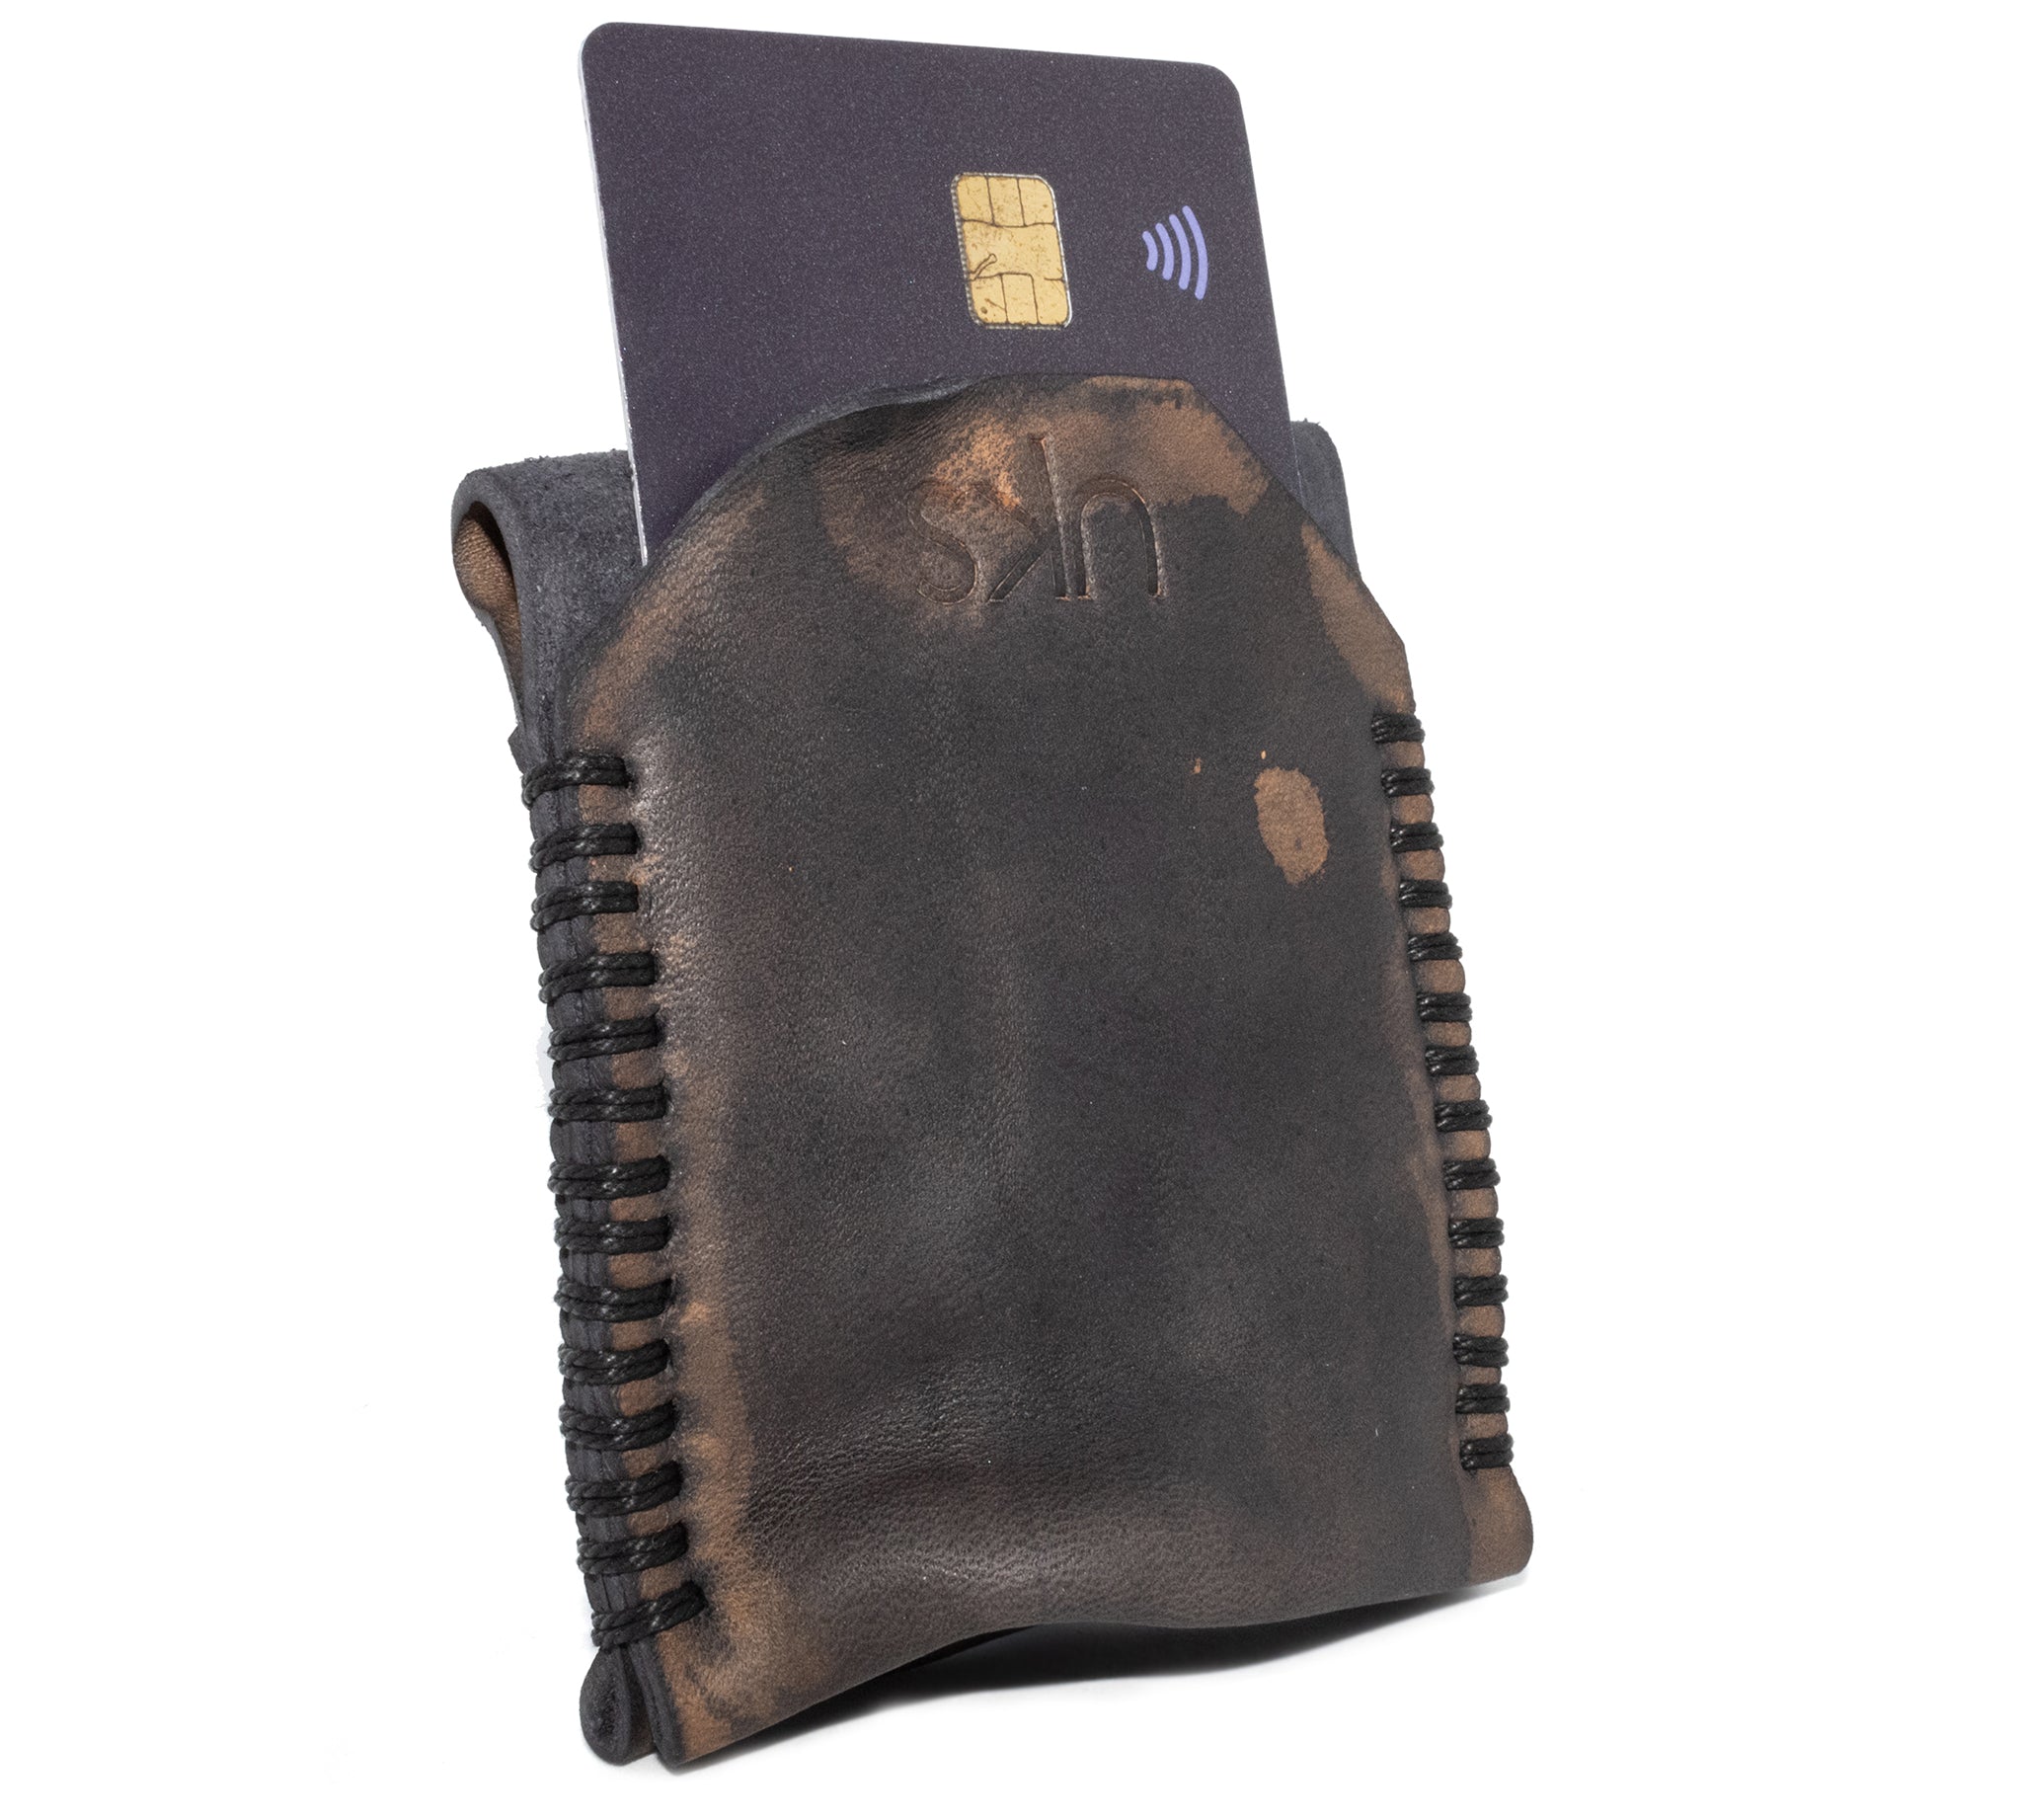 hand dyed and hand sewn horse culatta leather cardholder from atelier skn